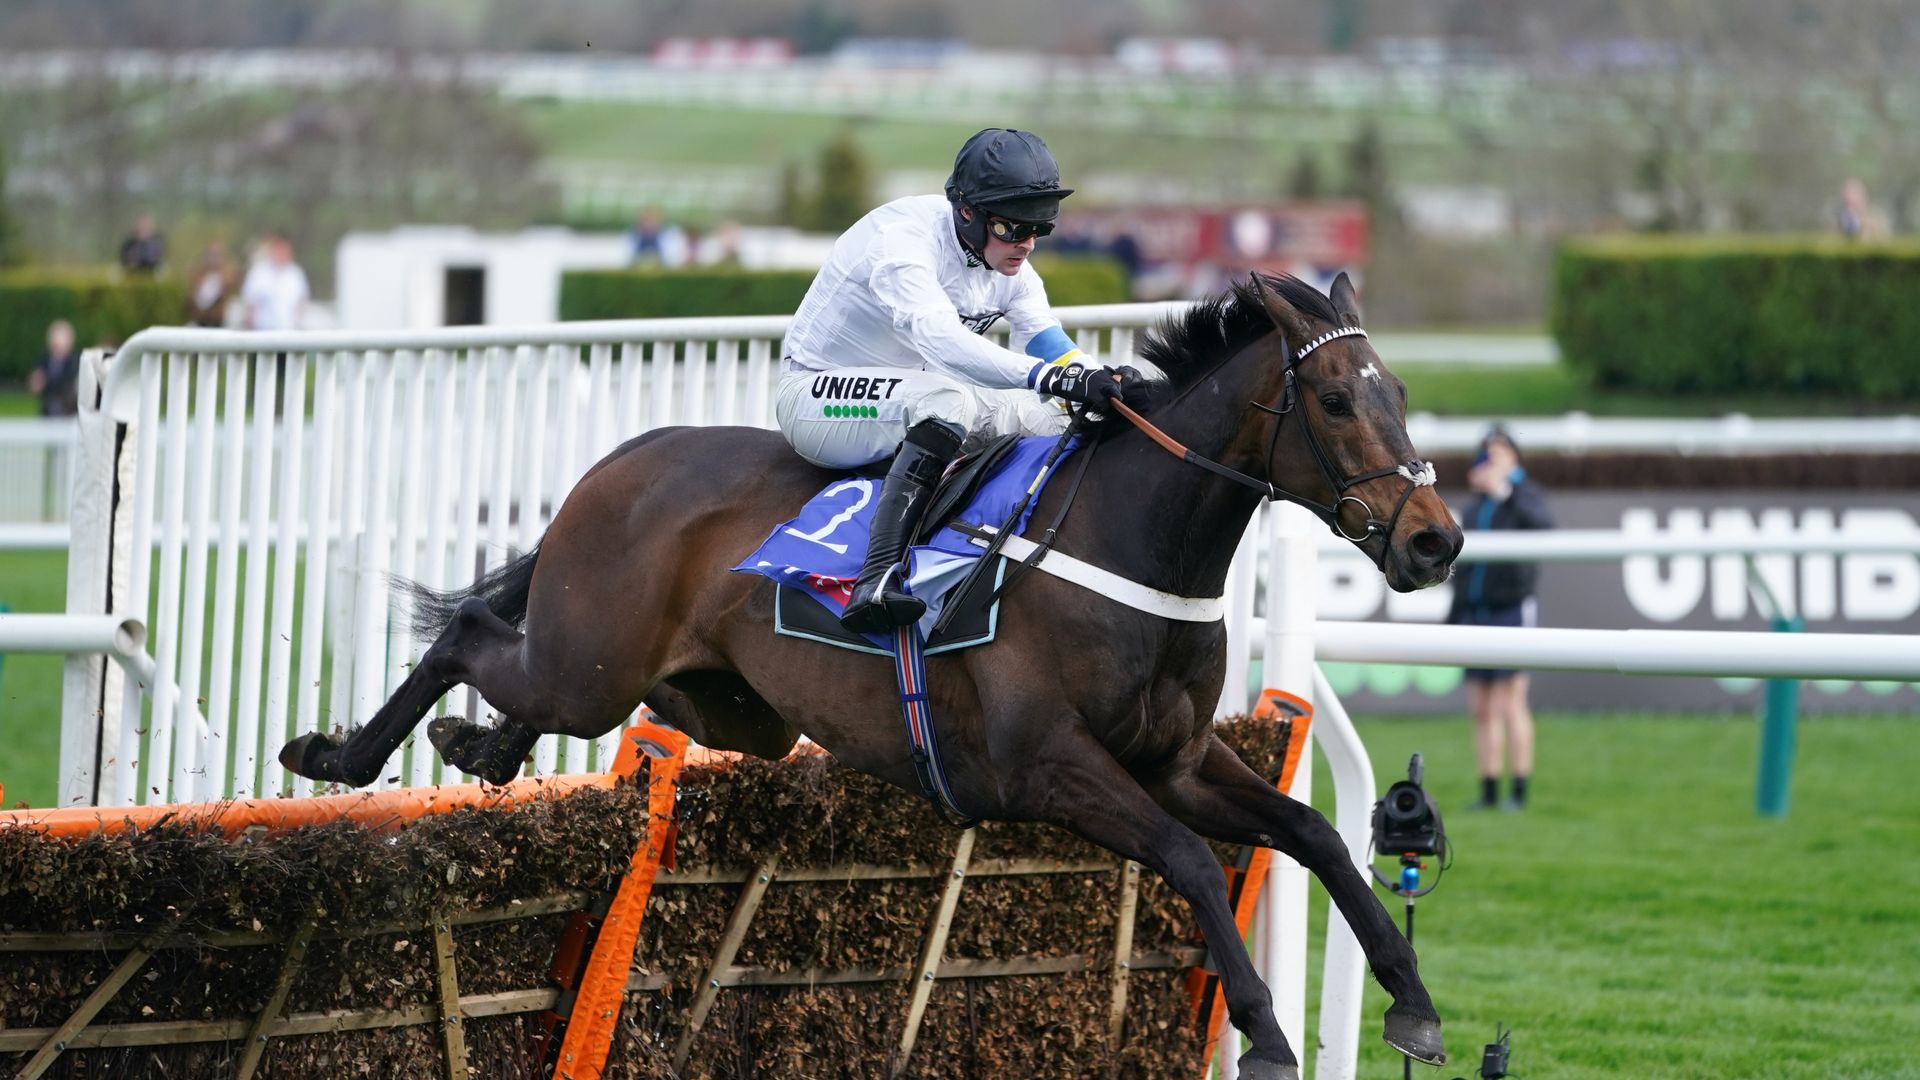 'He's a freak' - Constitution Hill flies home in Fighting Fifth